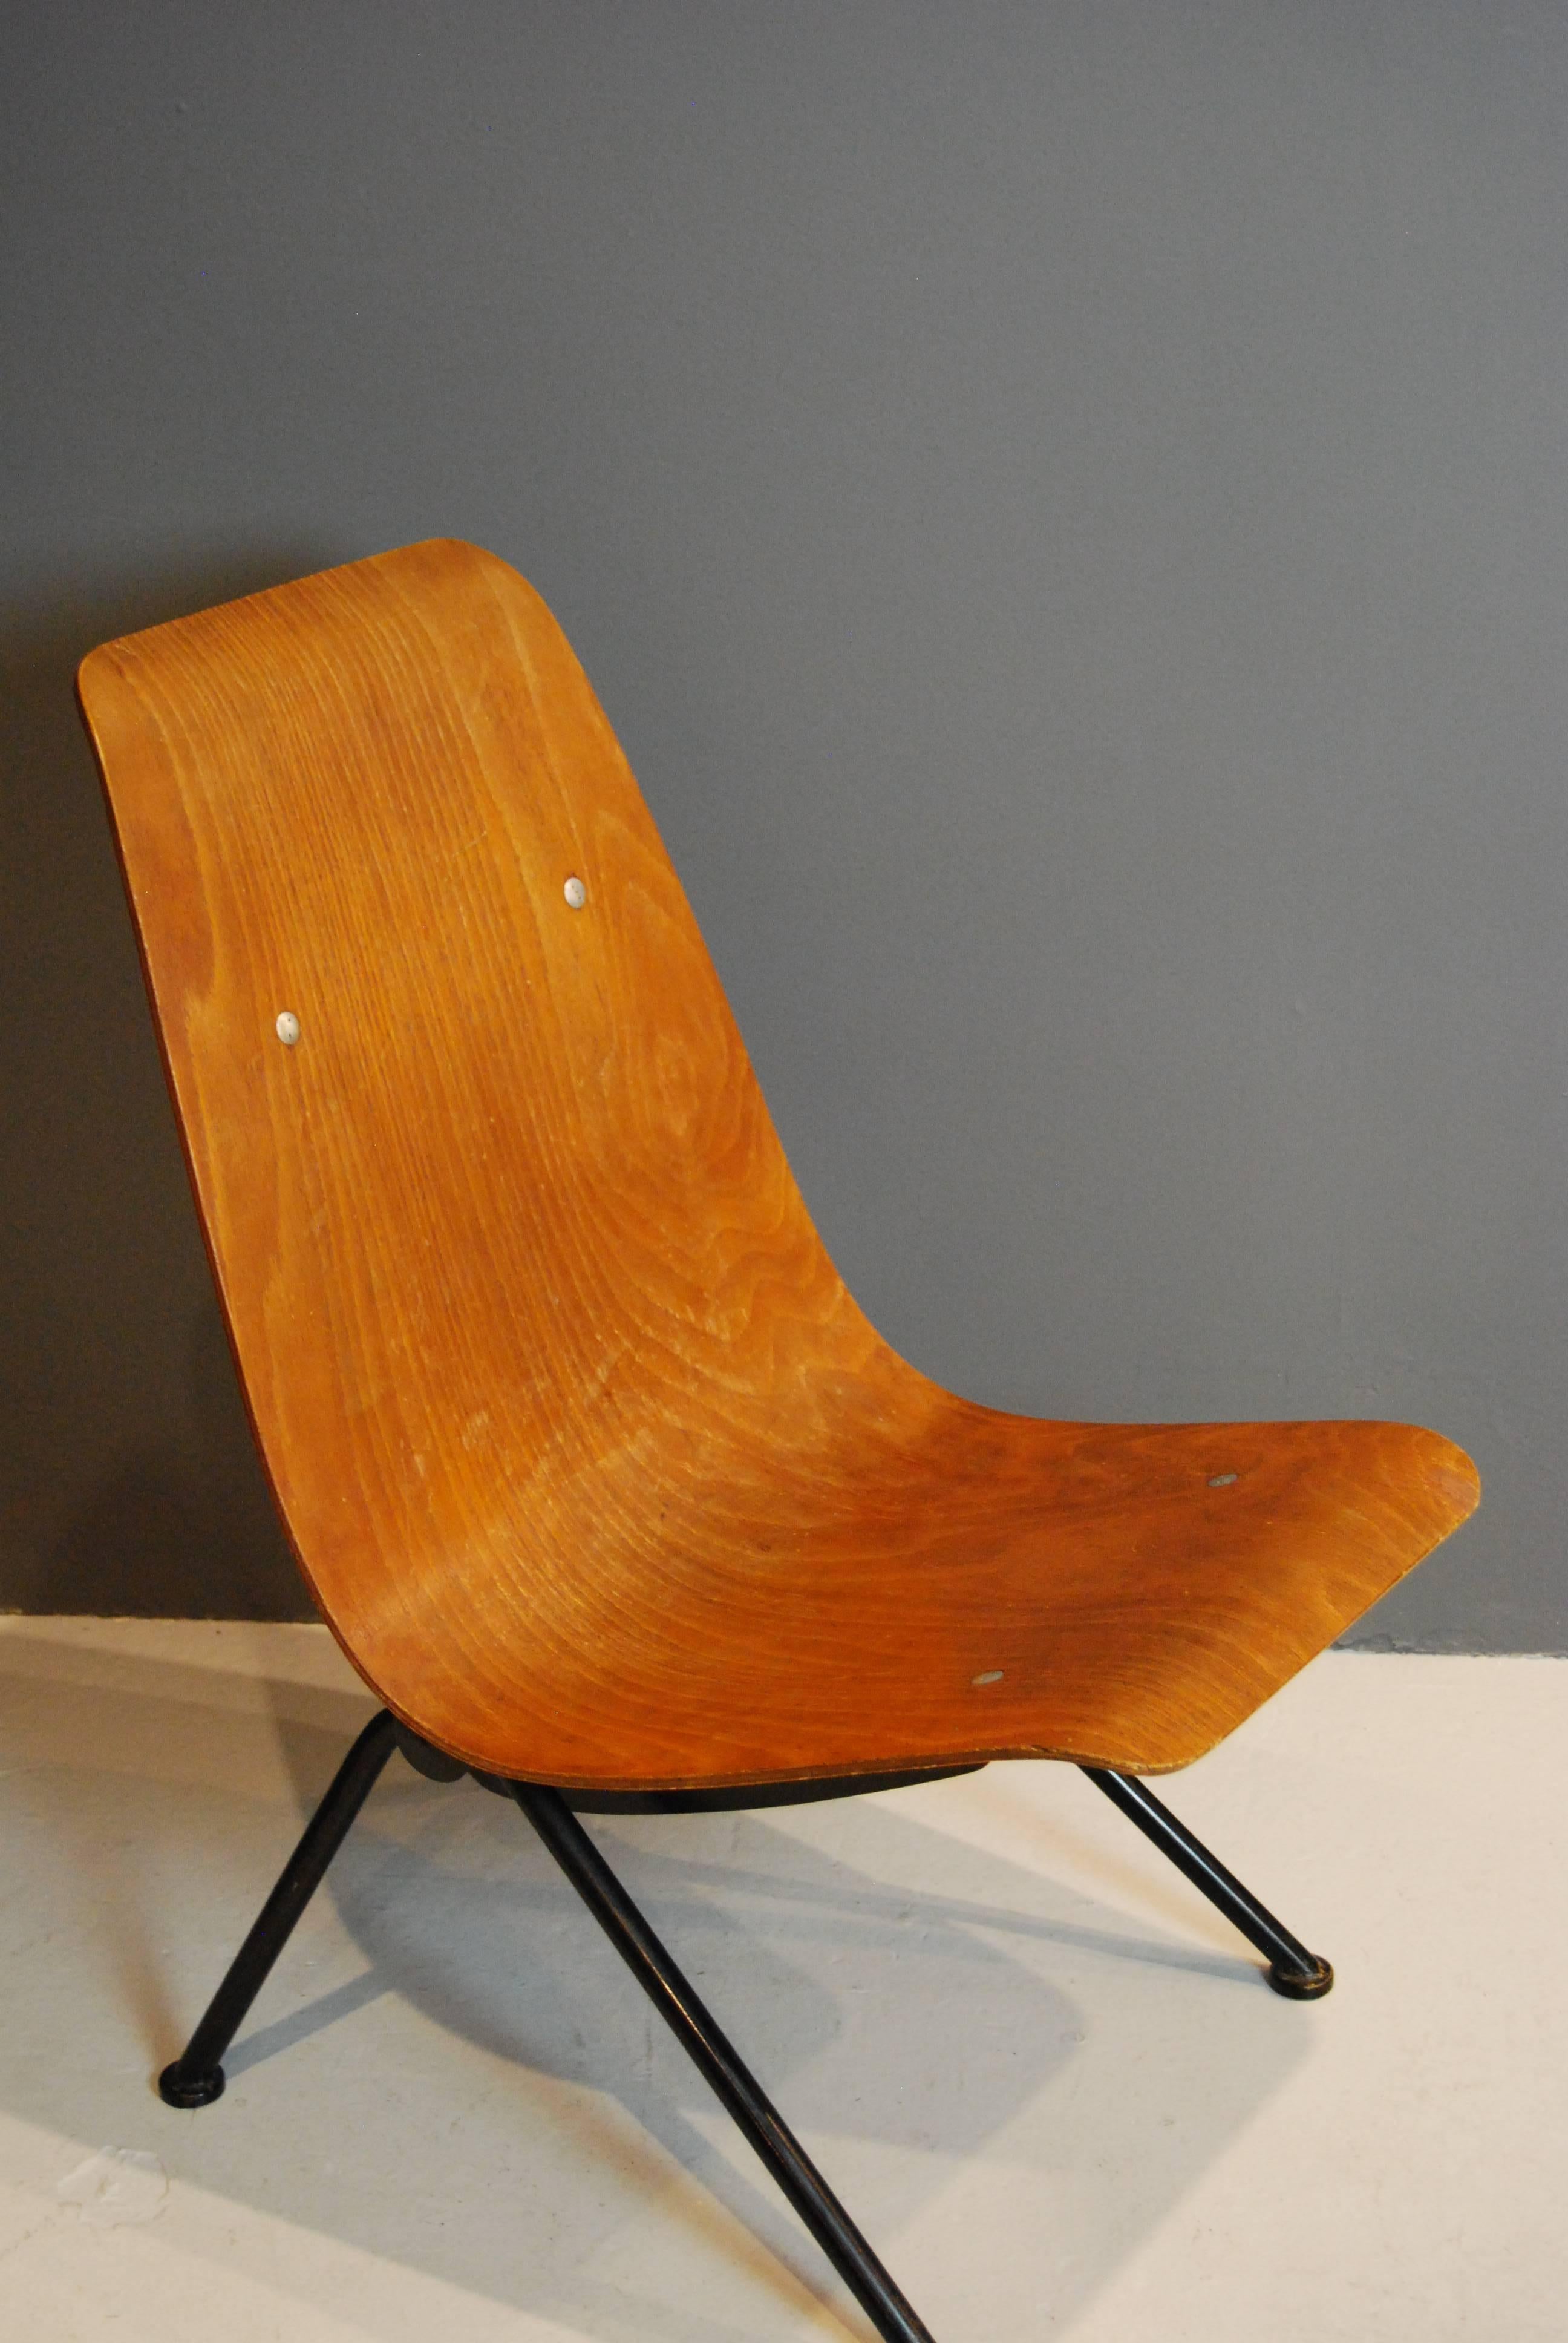 Industrial Antony Chair, Jean Prouve, 1954